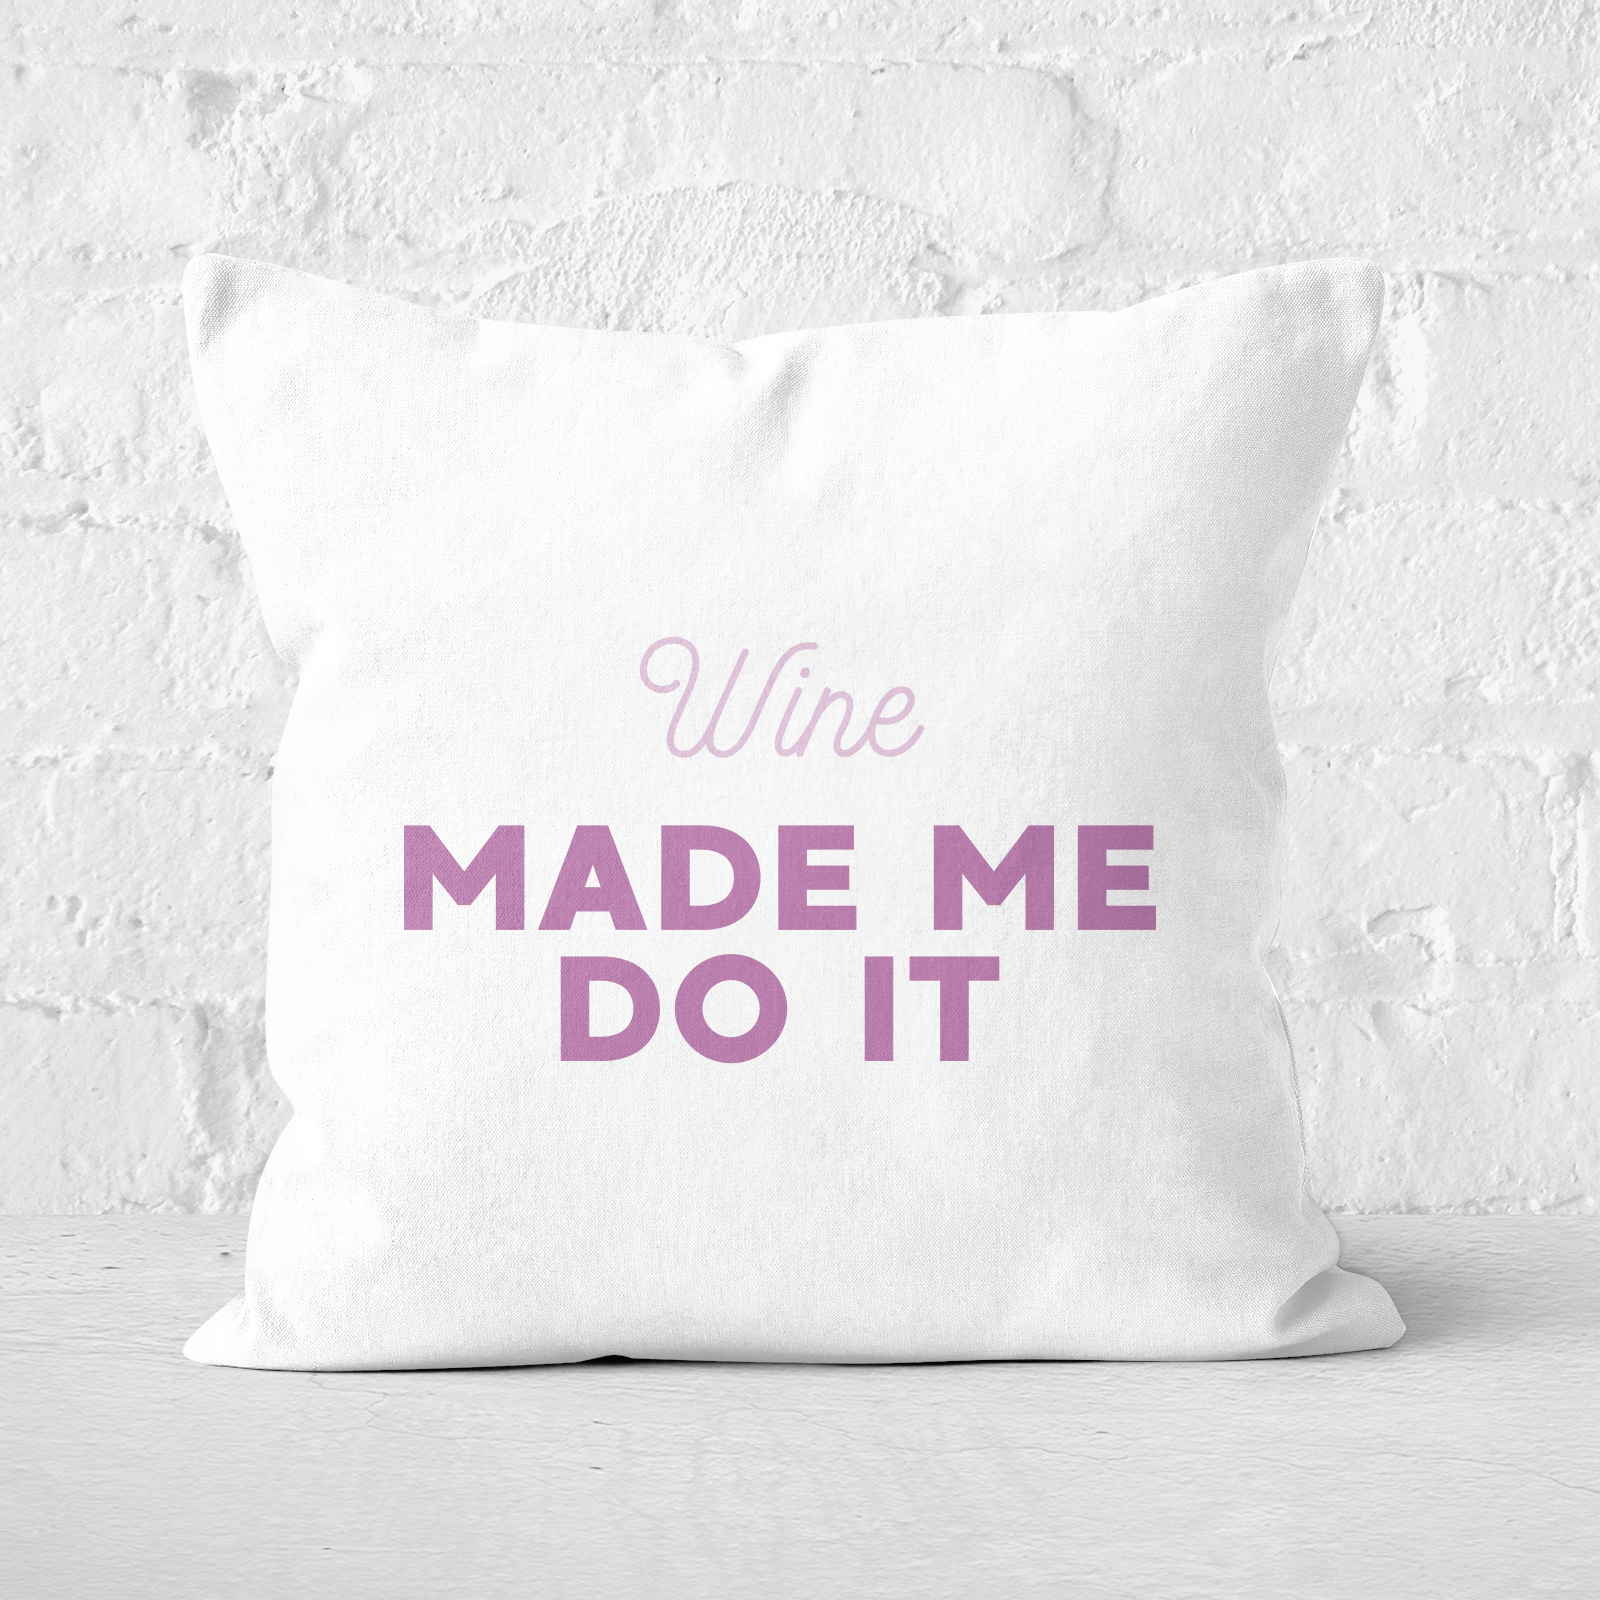 Wine Made Me Do It Square Cushion - 60x60cm - Soft Touch